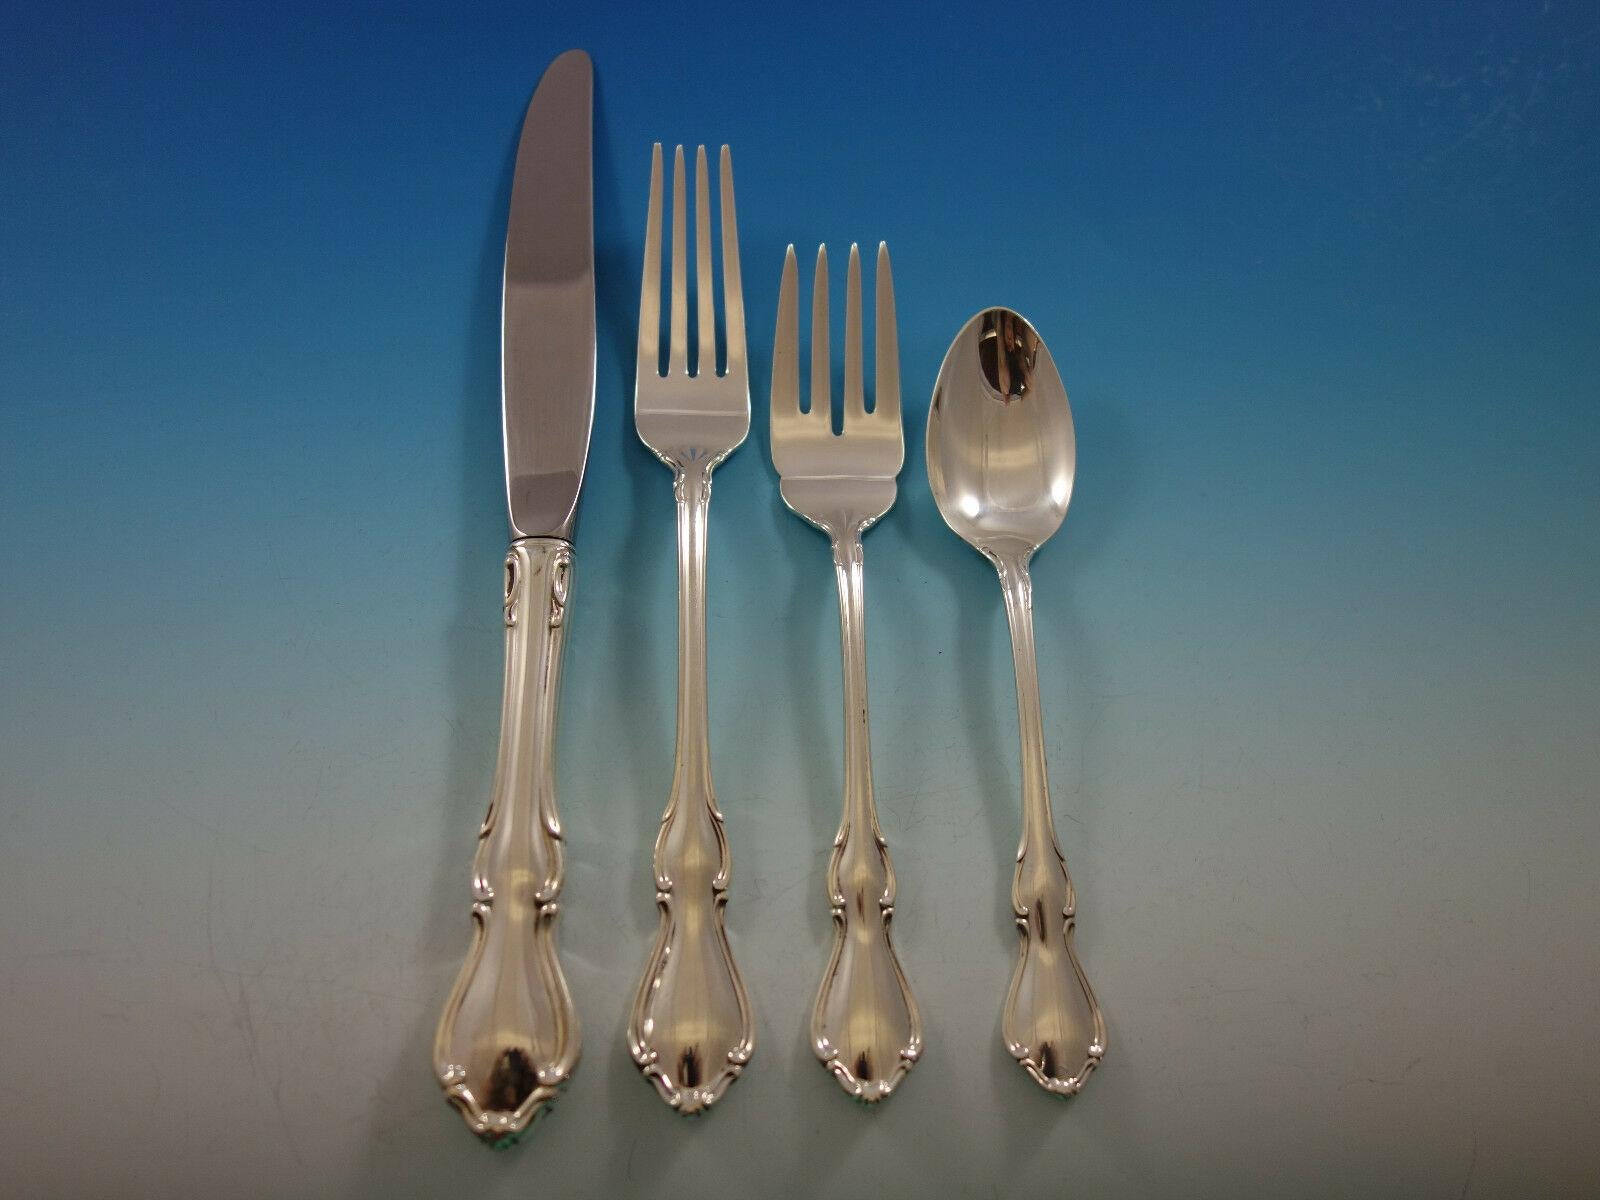 Large Hampton Court by Reed and Barton sterling silver flatware set - 118 pieces. This service for 18 is perfect for large gatherings. This set includes:

18 knives, 9 1/8